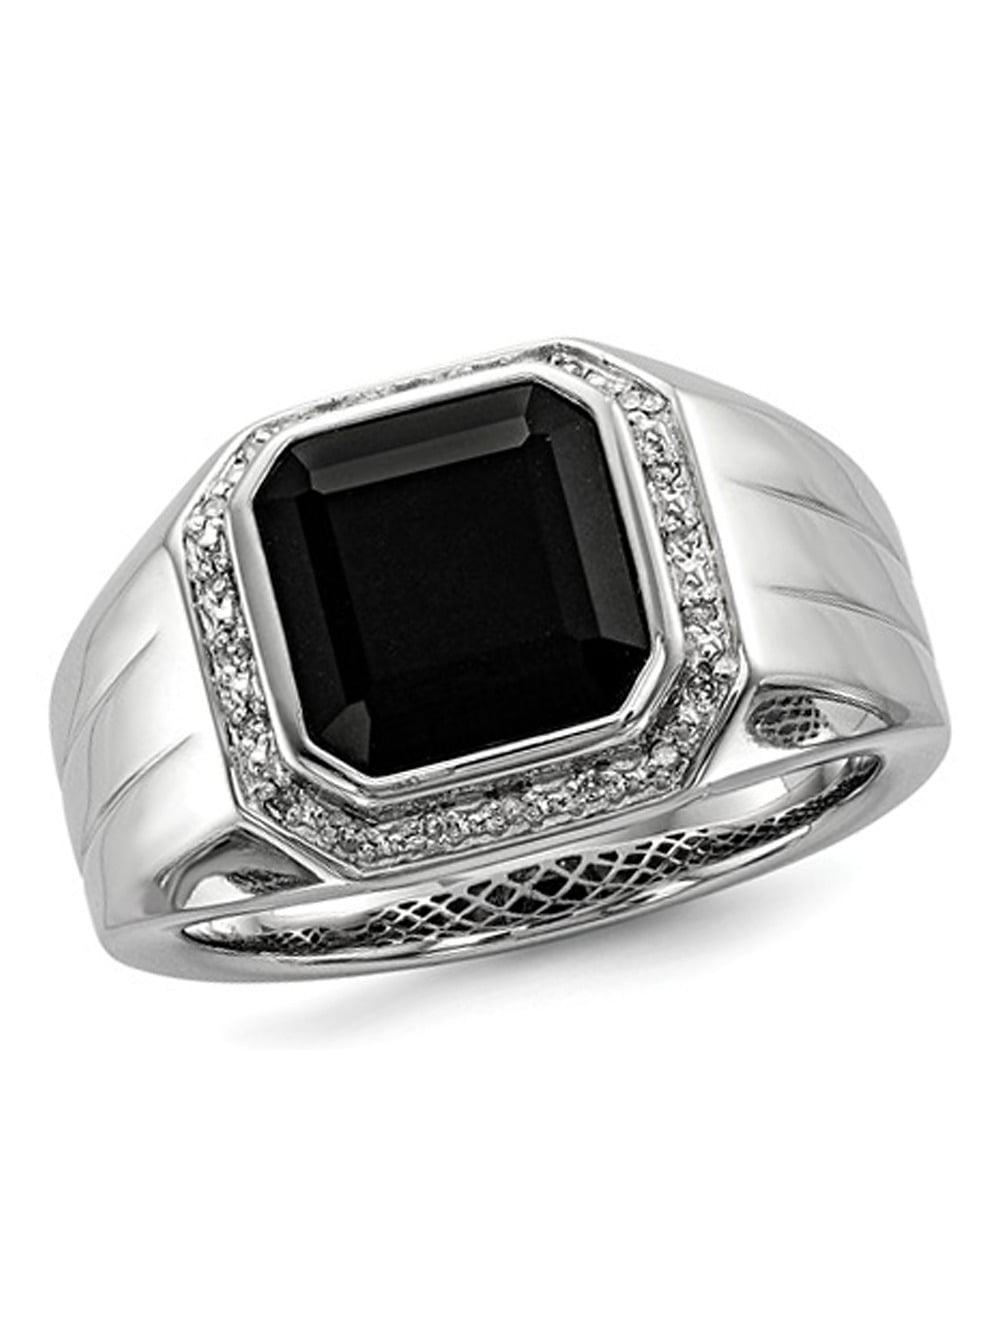 Mens Diamond & Simulated Onyx Ring Sterling Silver or Yellow Gold Plated Silver